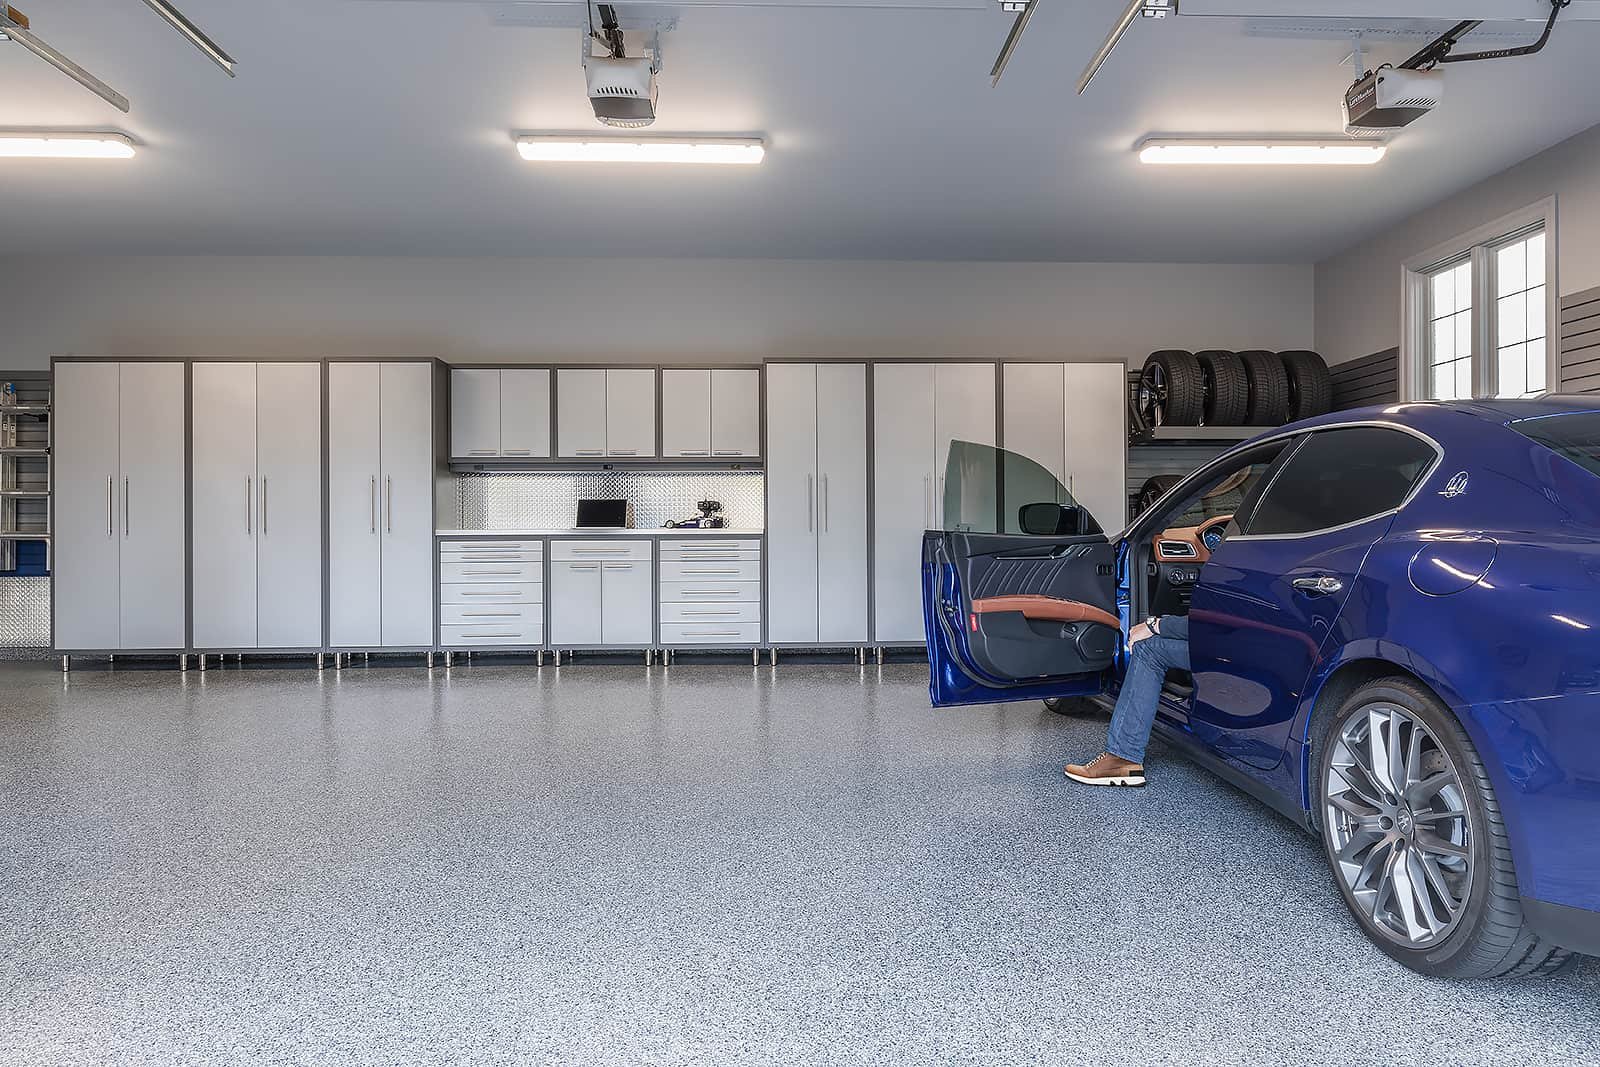 How To Install Garage Floor Mats or Tiles in Cold Weather